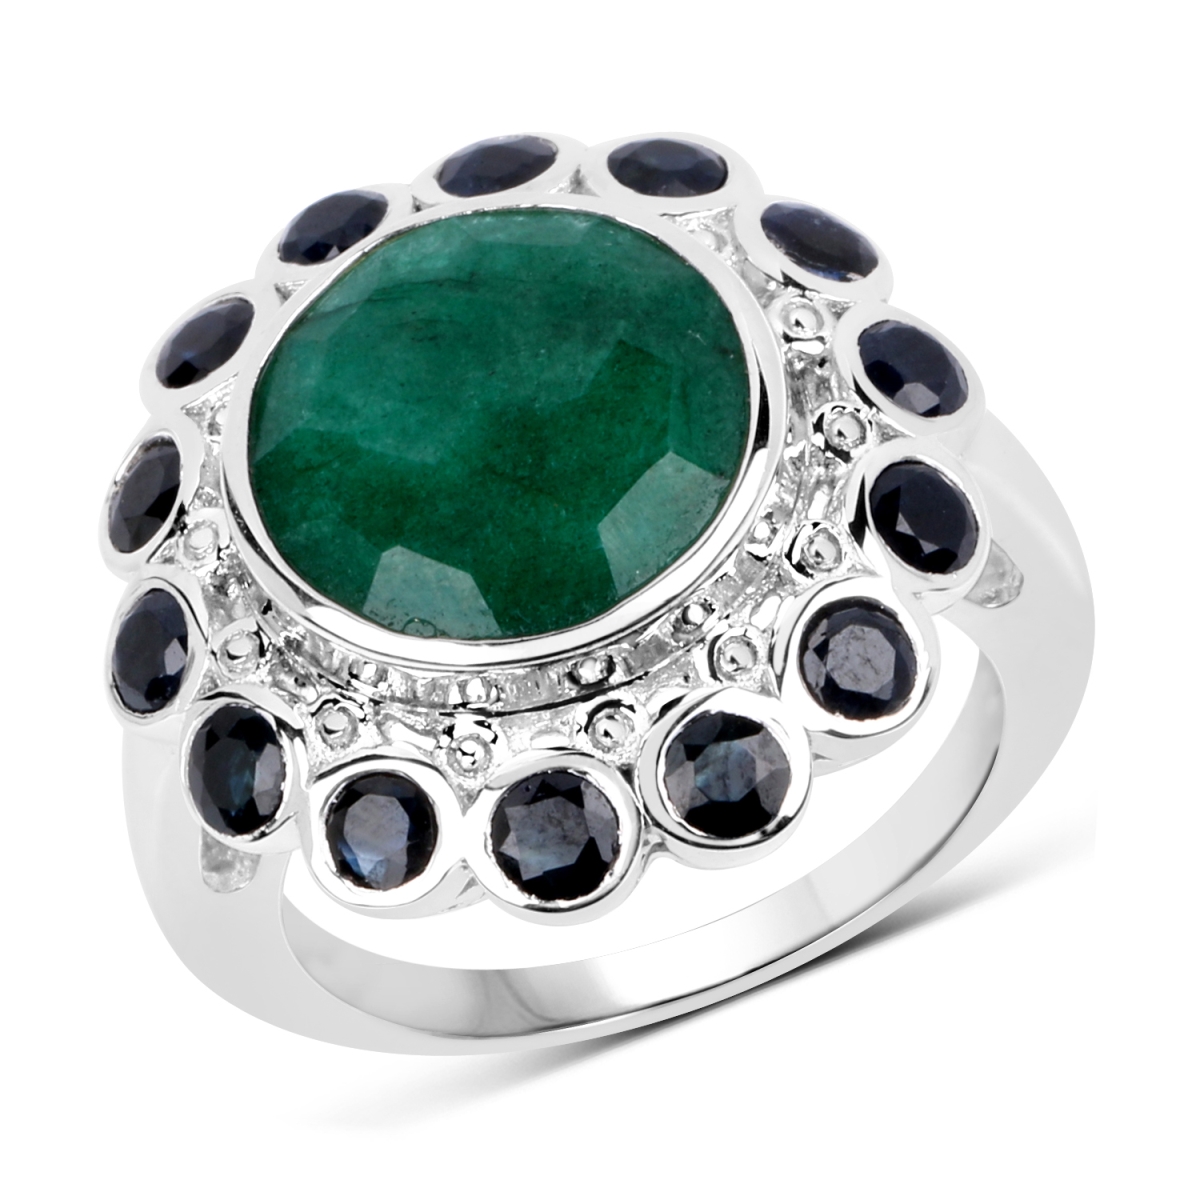 Picture of Malaika QR8237DYEDEBS-SSR-6 6.88 Carat Dyed Emerald & Blue Sapphire 0.925 Sterling Silver Ring